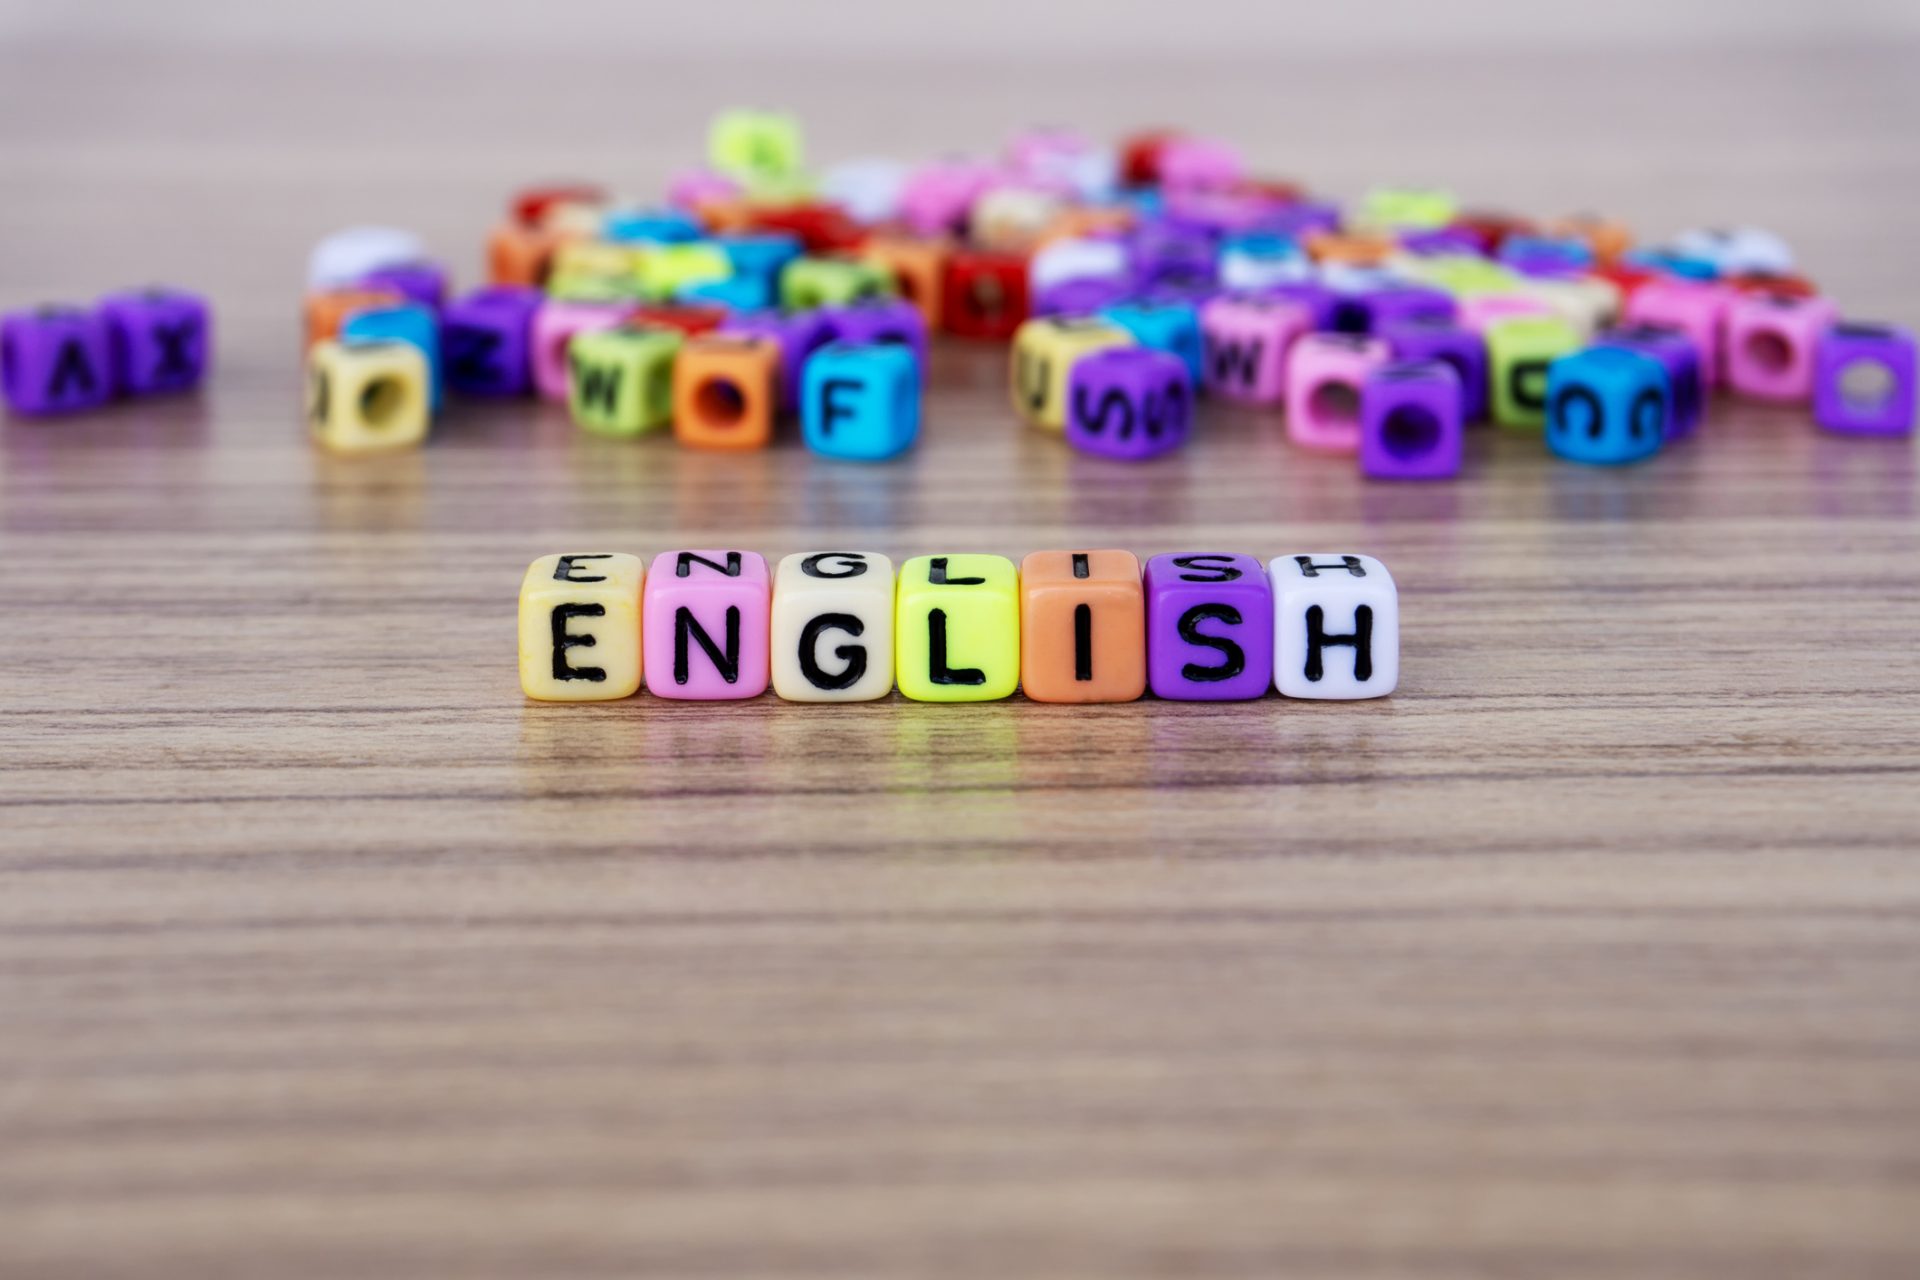 These are the toughest 15 languages for English speakers to learn